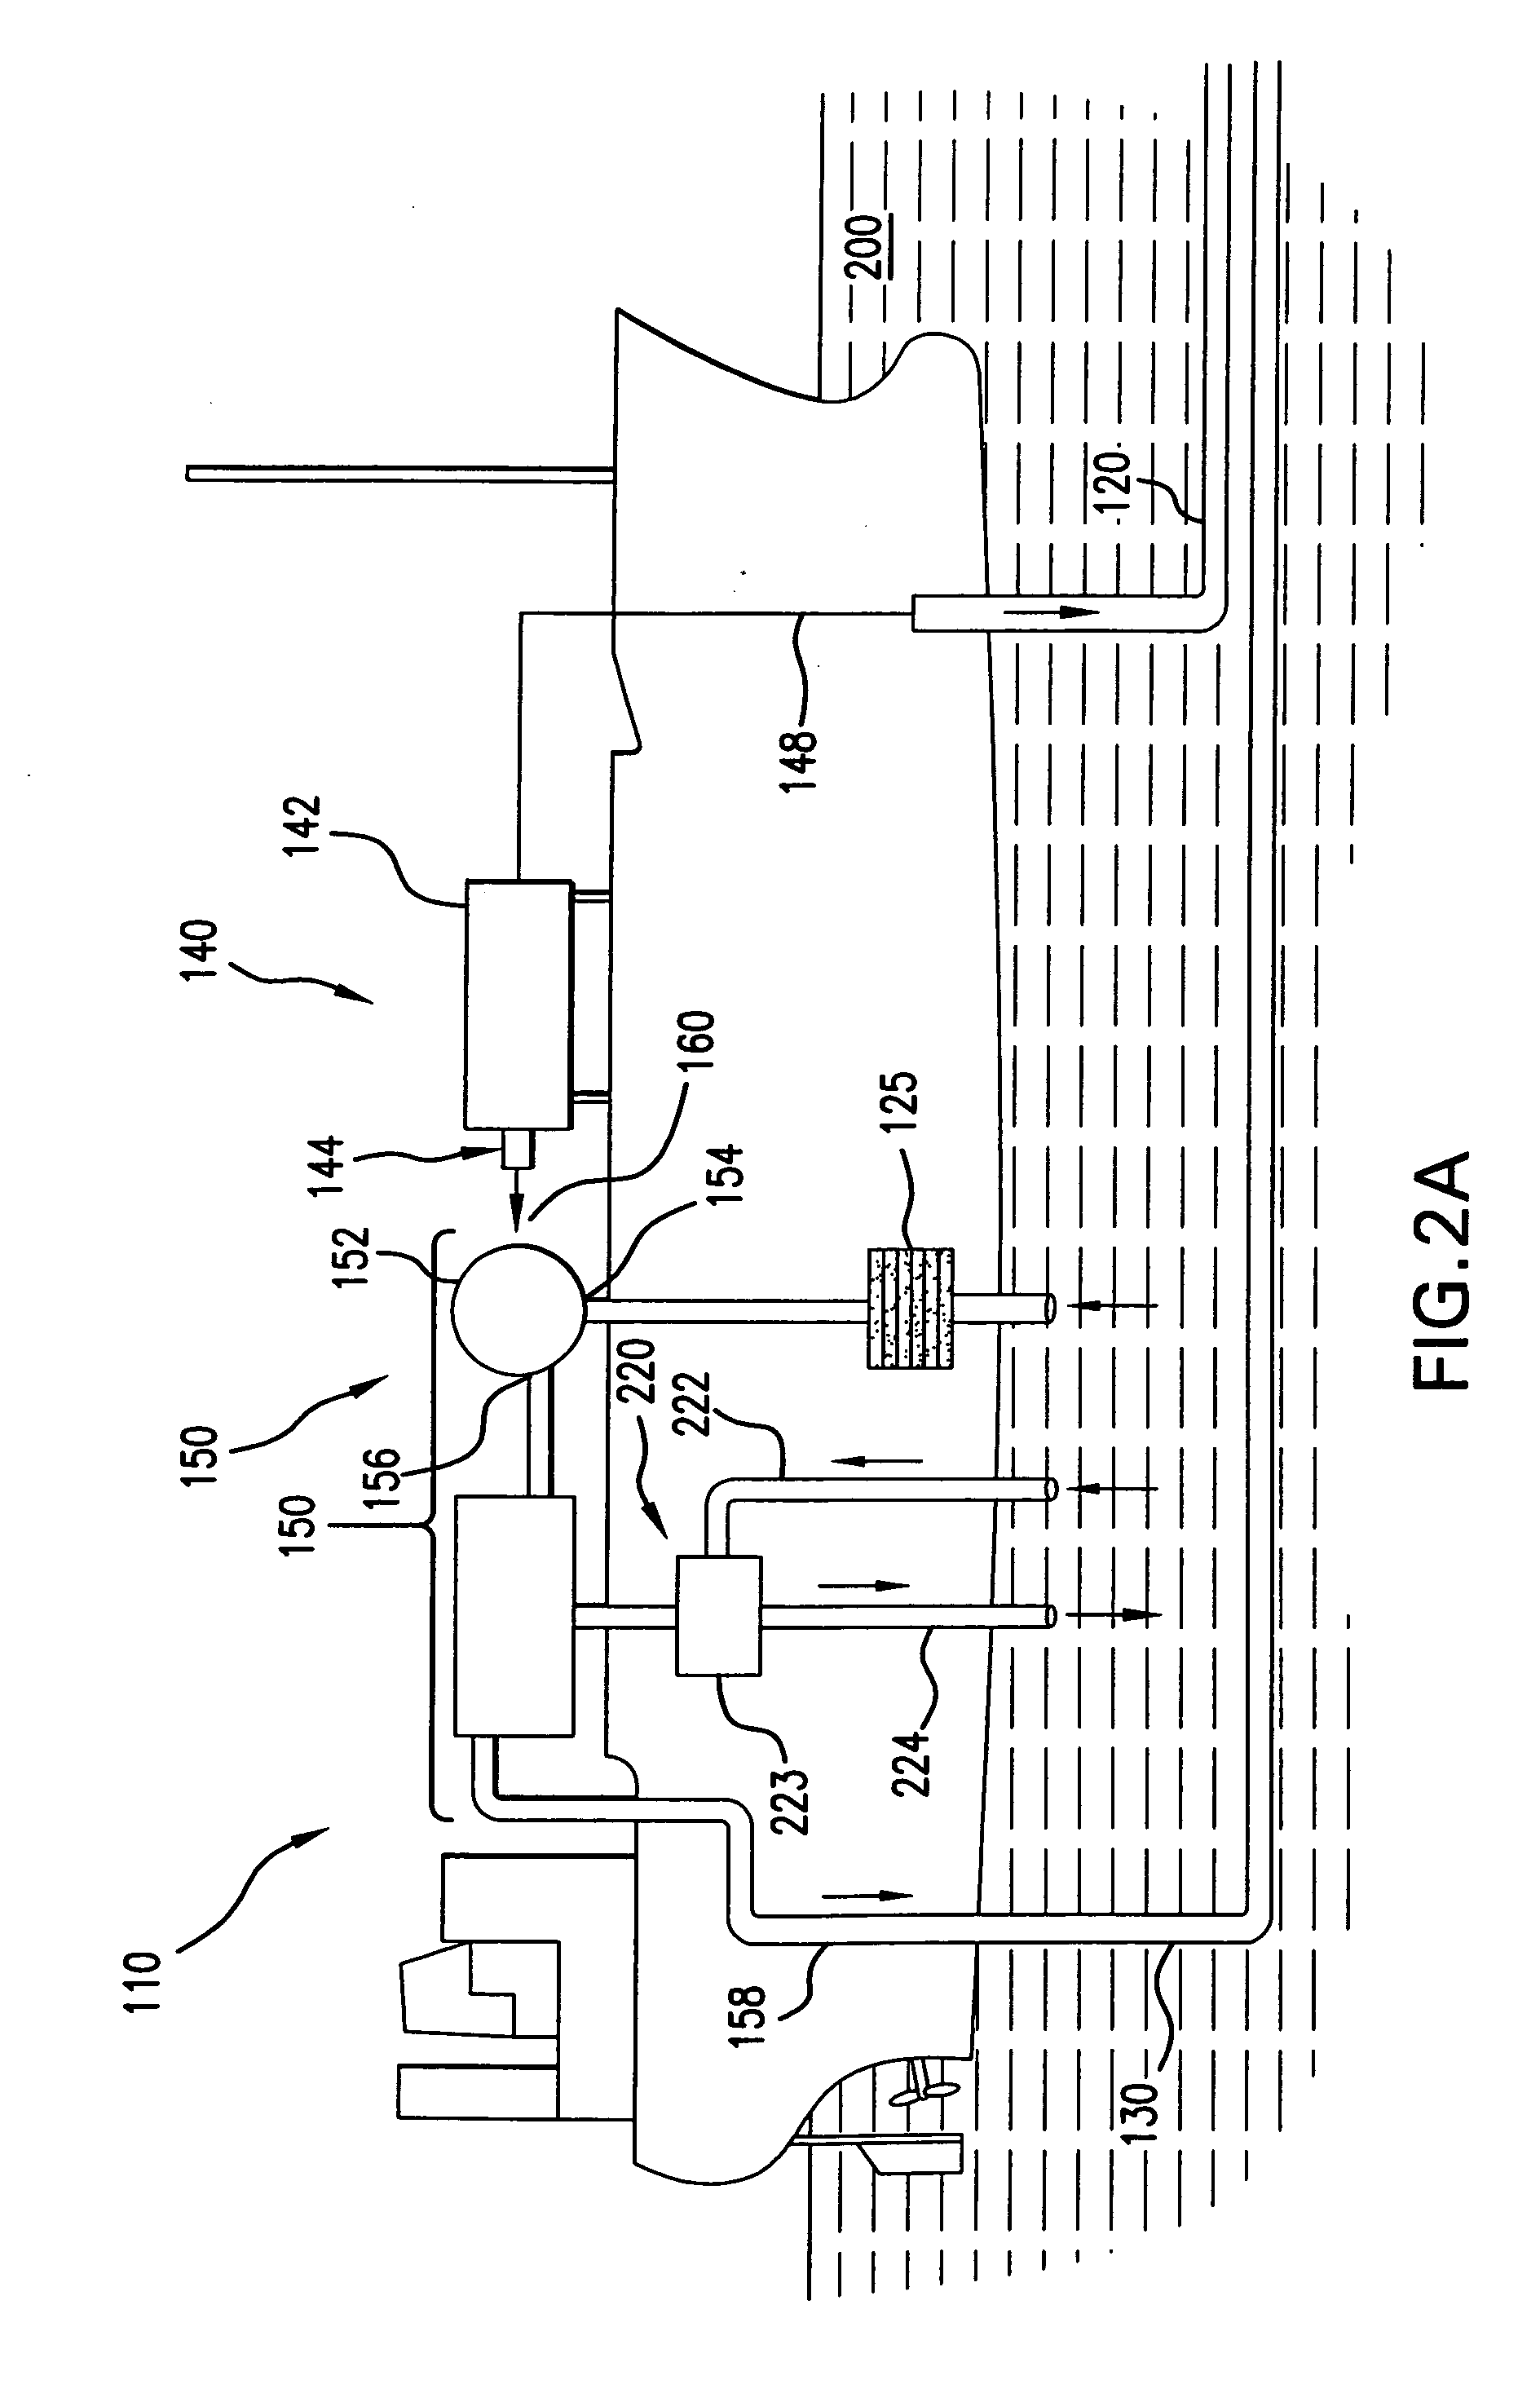 Methods and systems for producing electricity and desalinated water